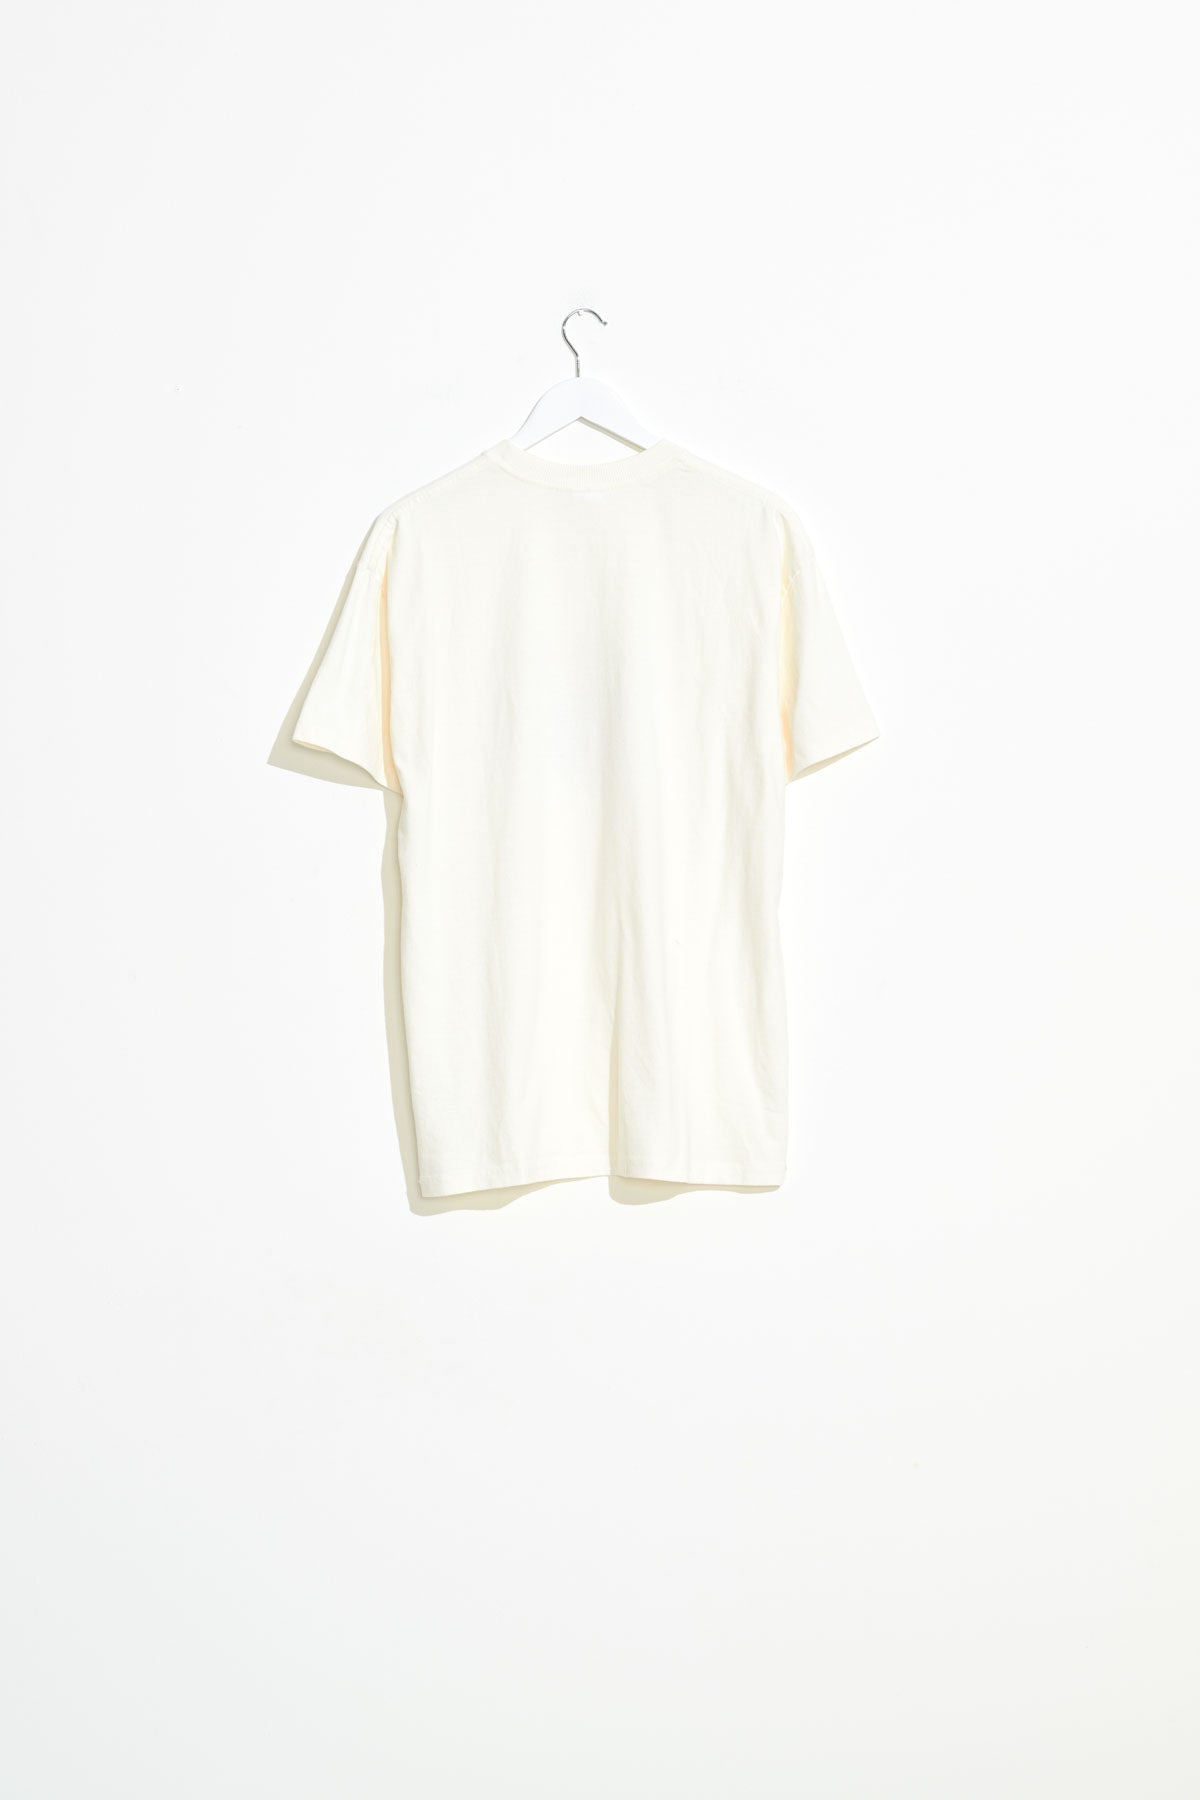 Misfit Shapes - Yeah Well What 50-50 SS Tee - Pigment Thrift White